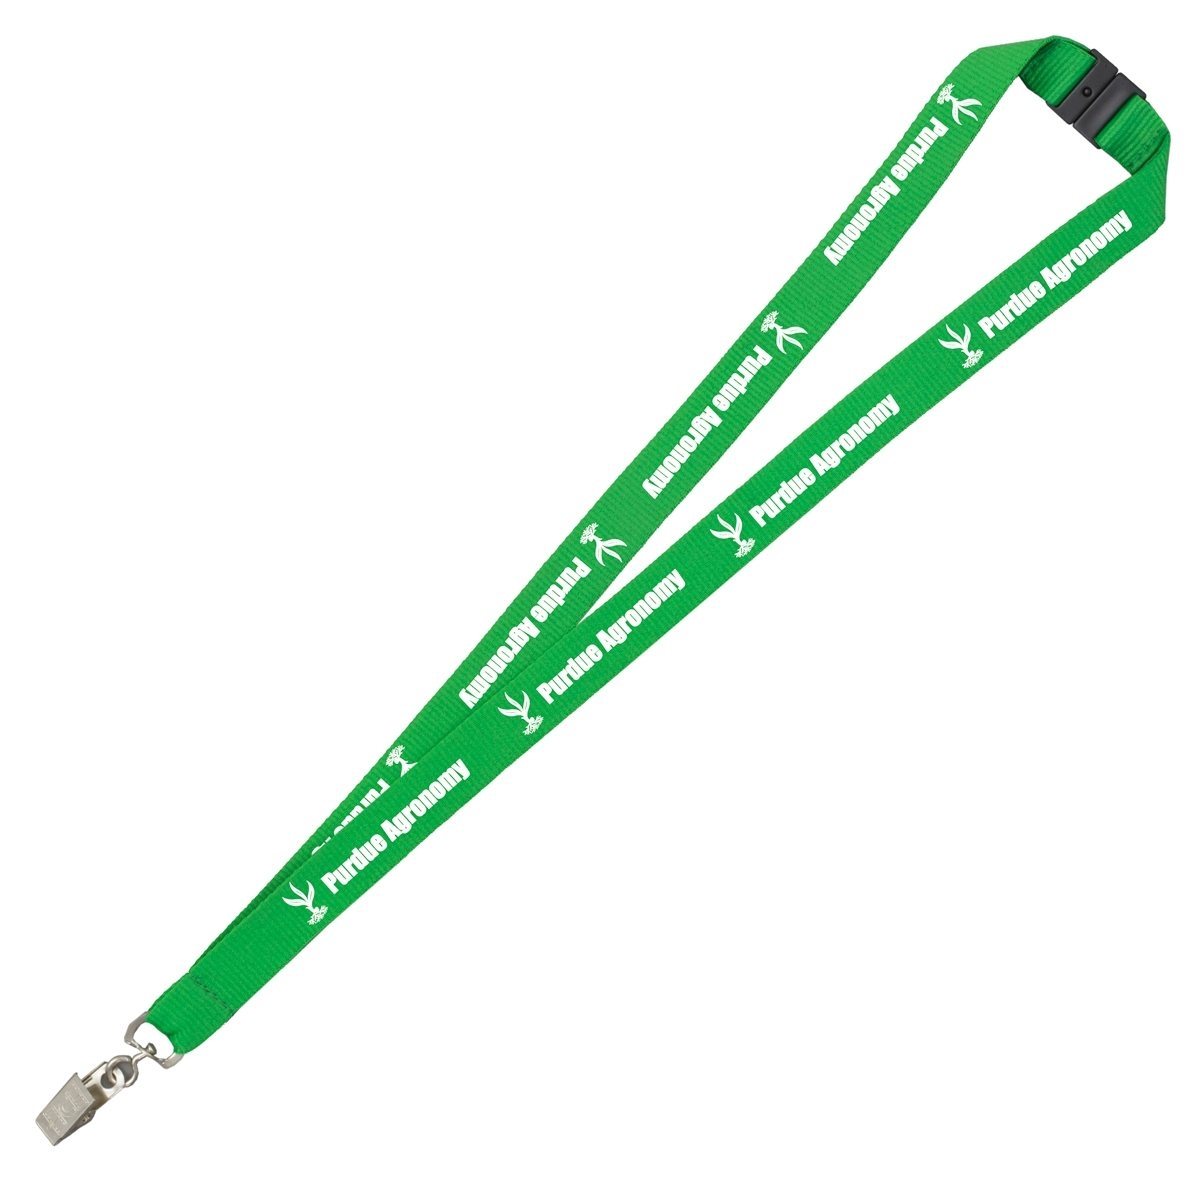 Can I order lanyards for a specific event theme?